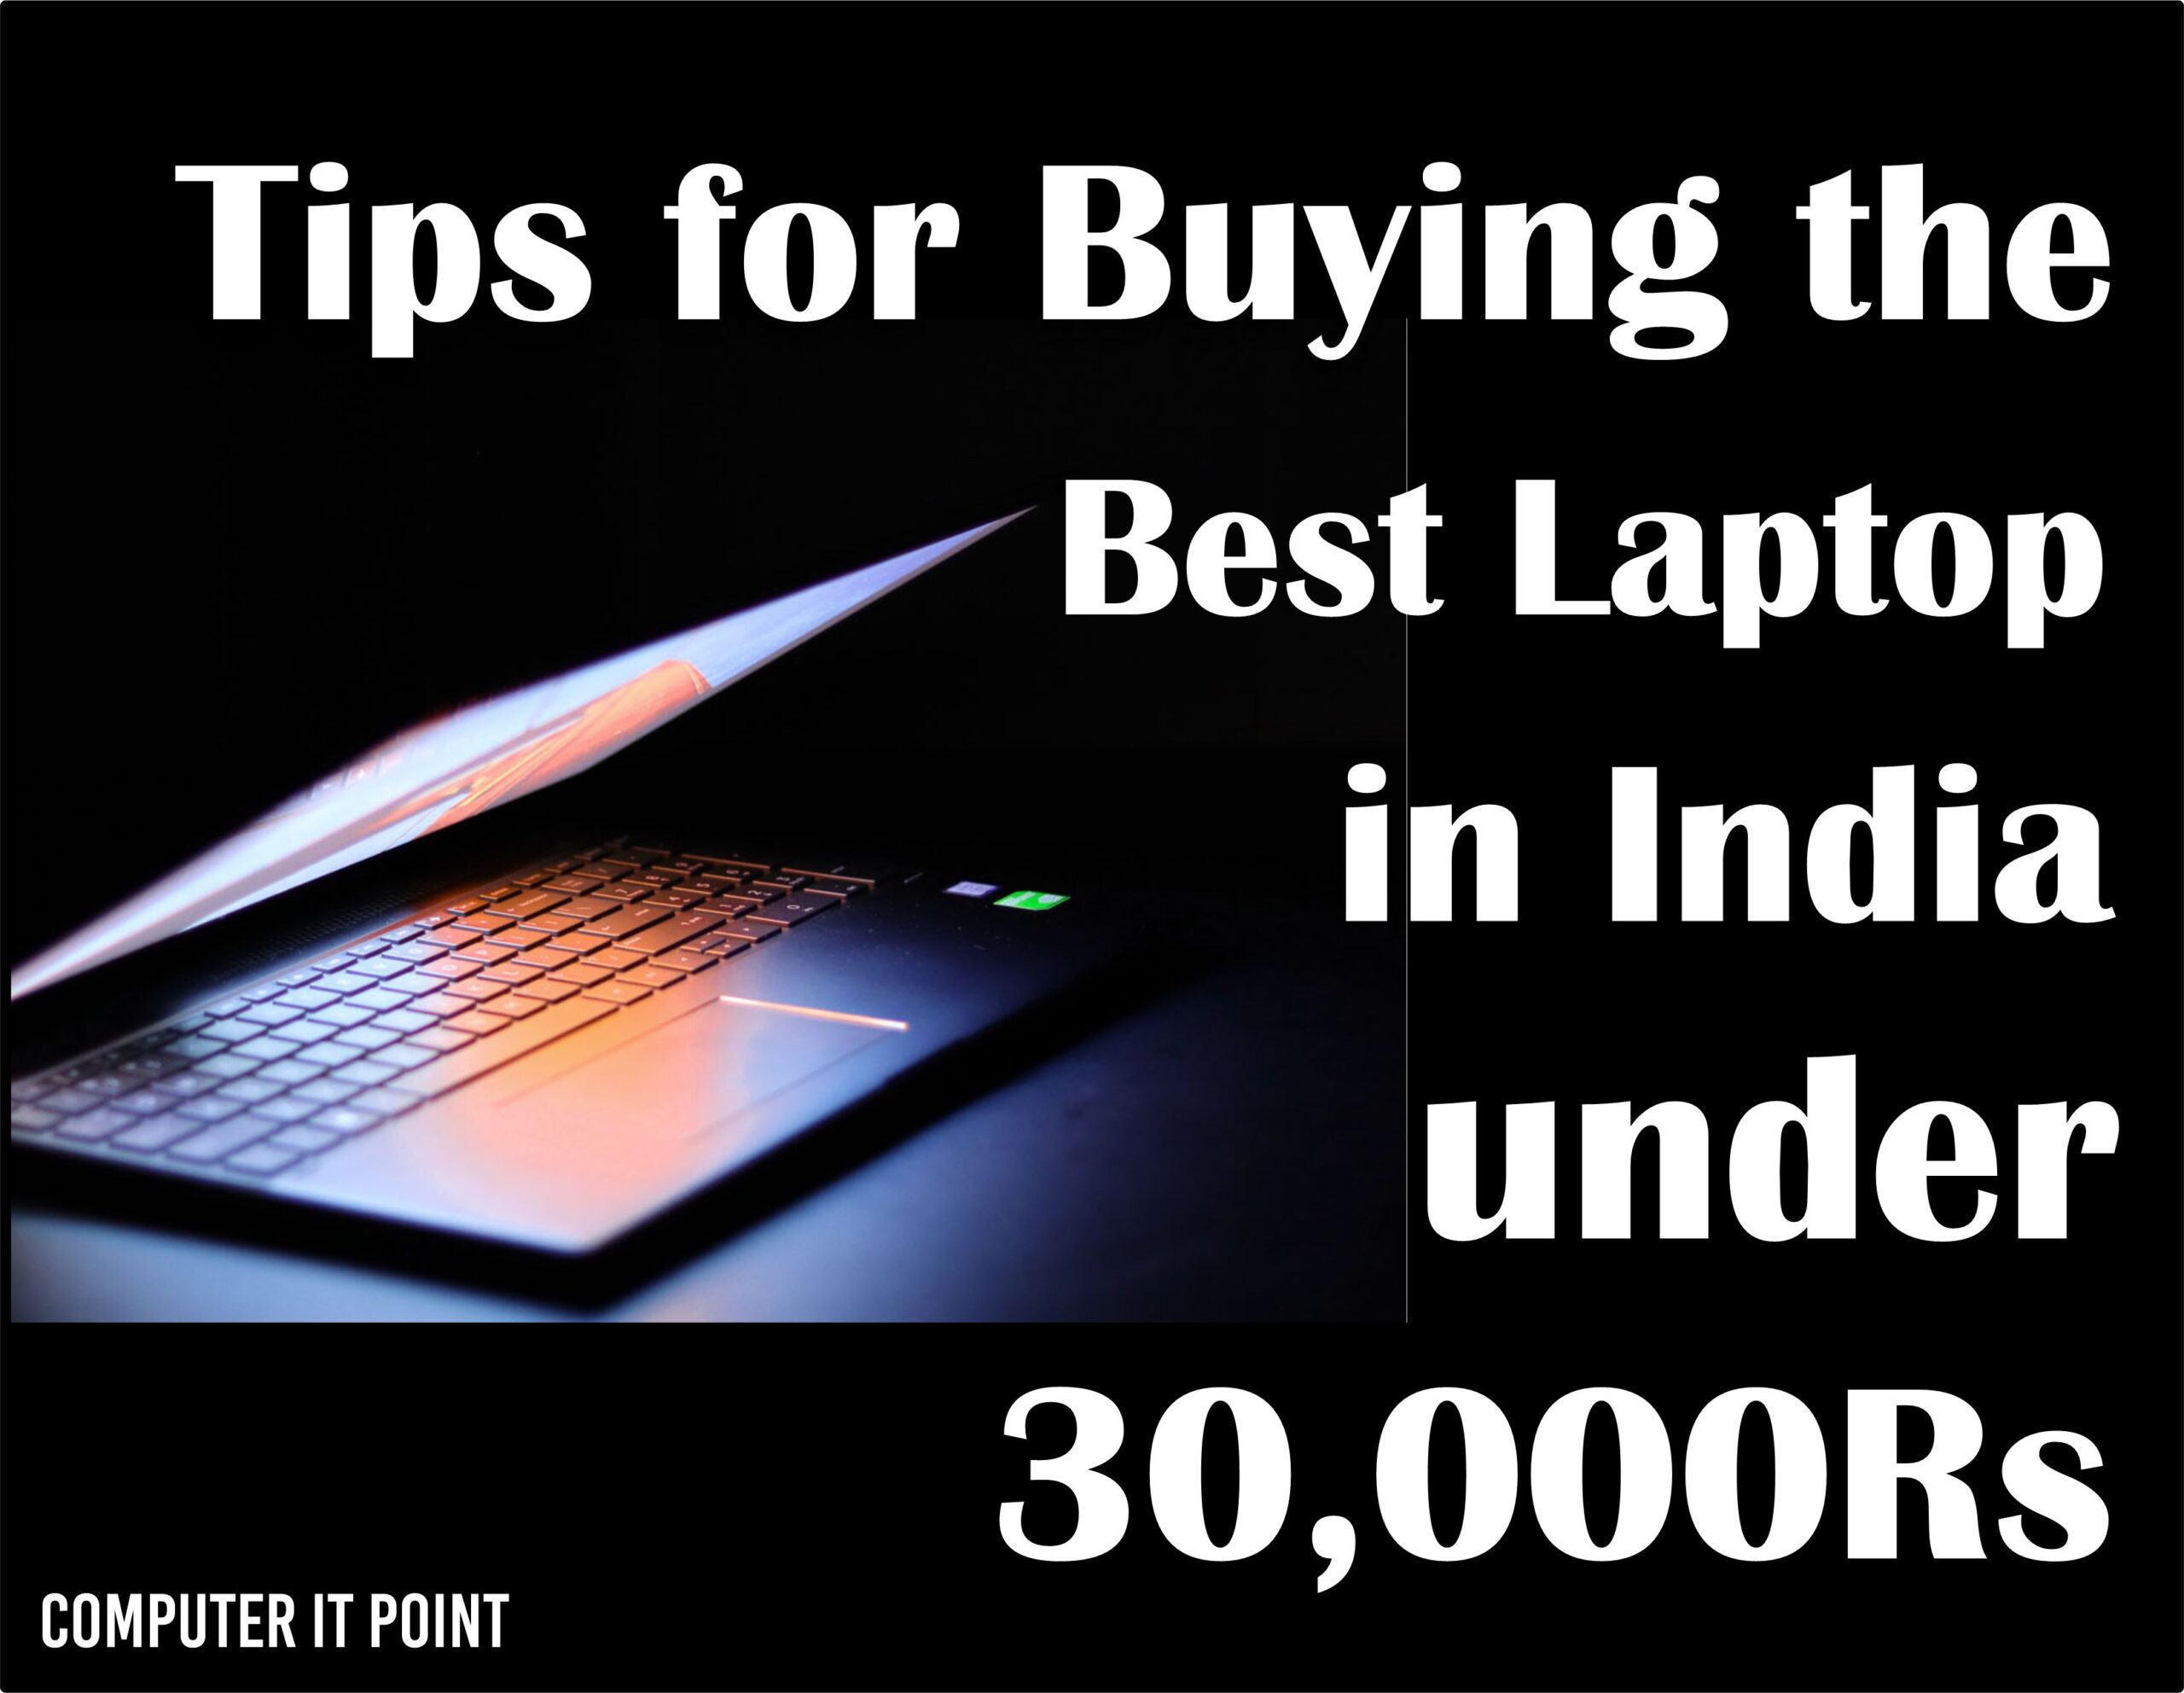 Buying the Best Laptop in India under 30000Rs